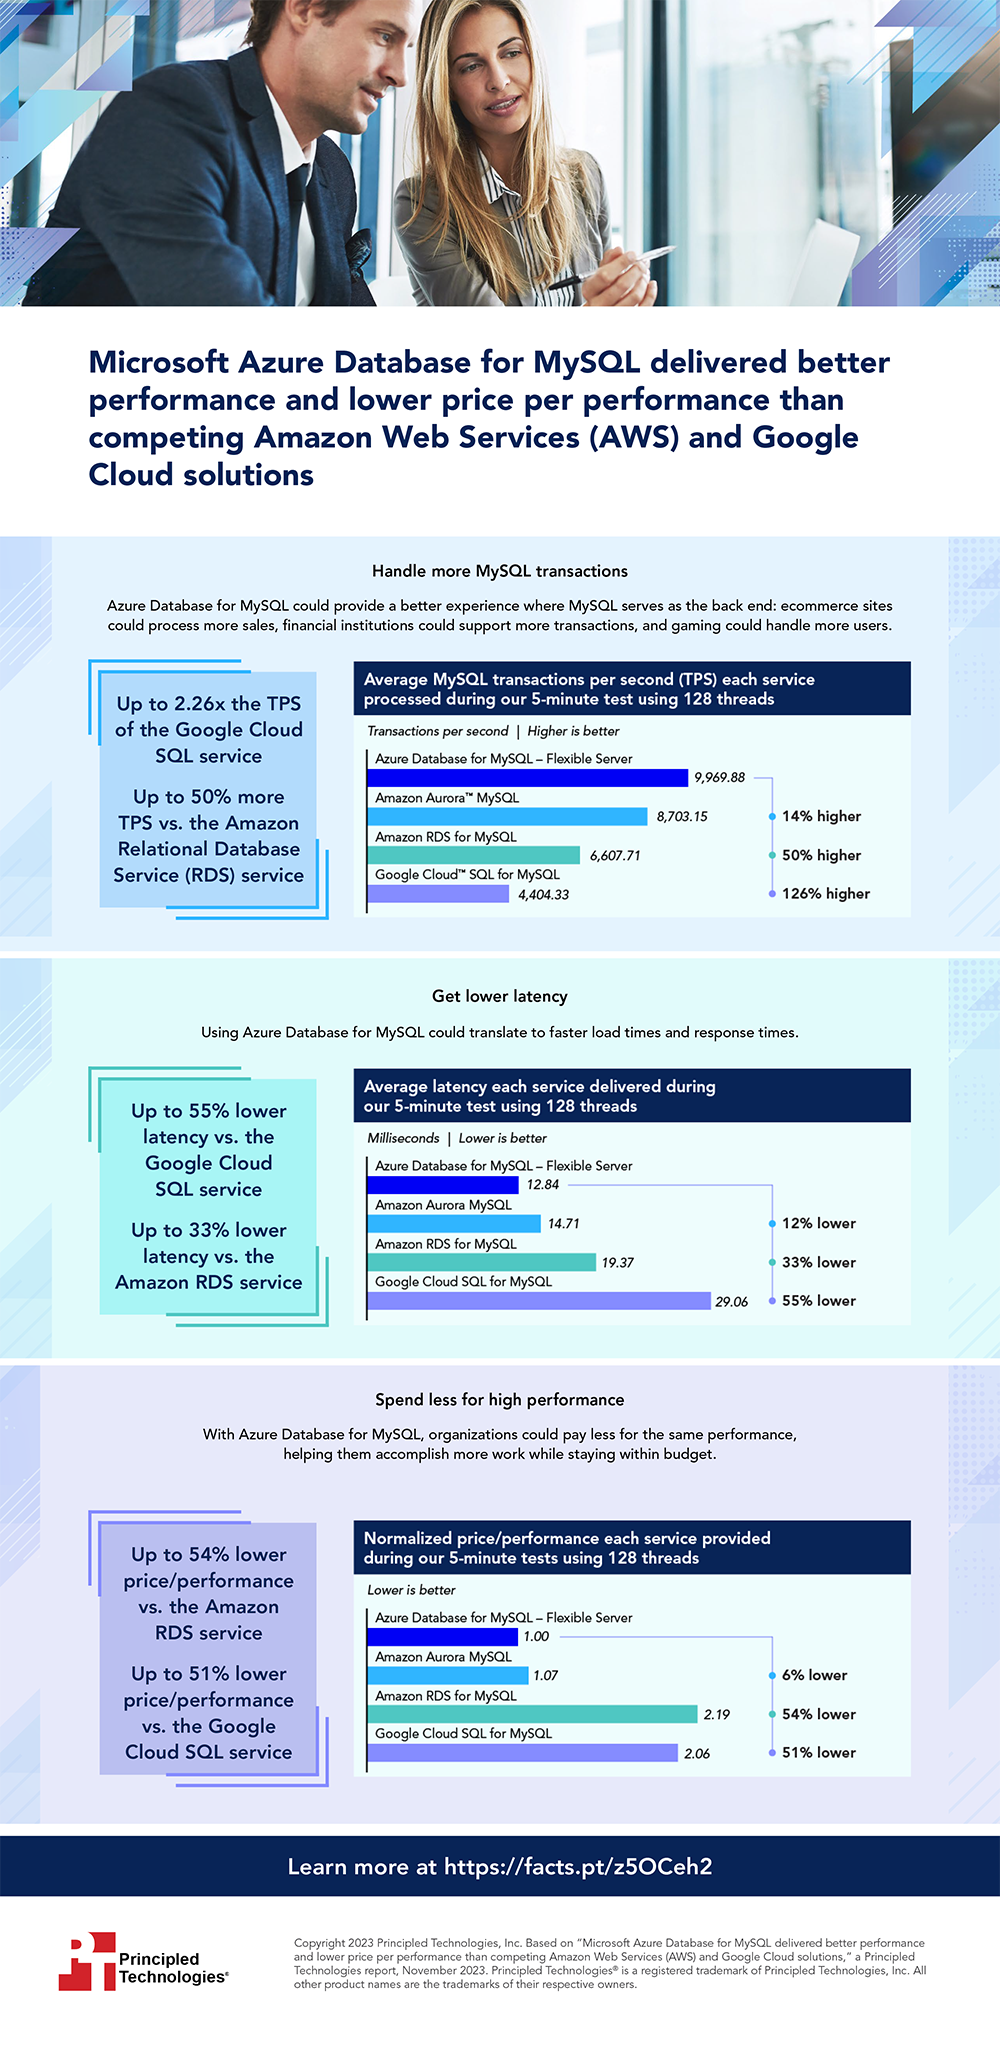 Microsoft Azure Database for MySQL delivered better performance and lower price per performance than competing Amazon Web Services (AWS) and Google Cloud solutions – Infographic